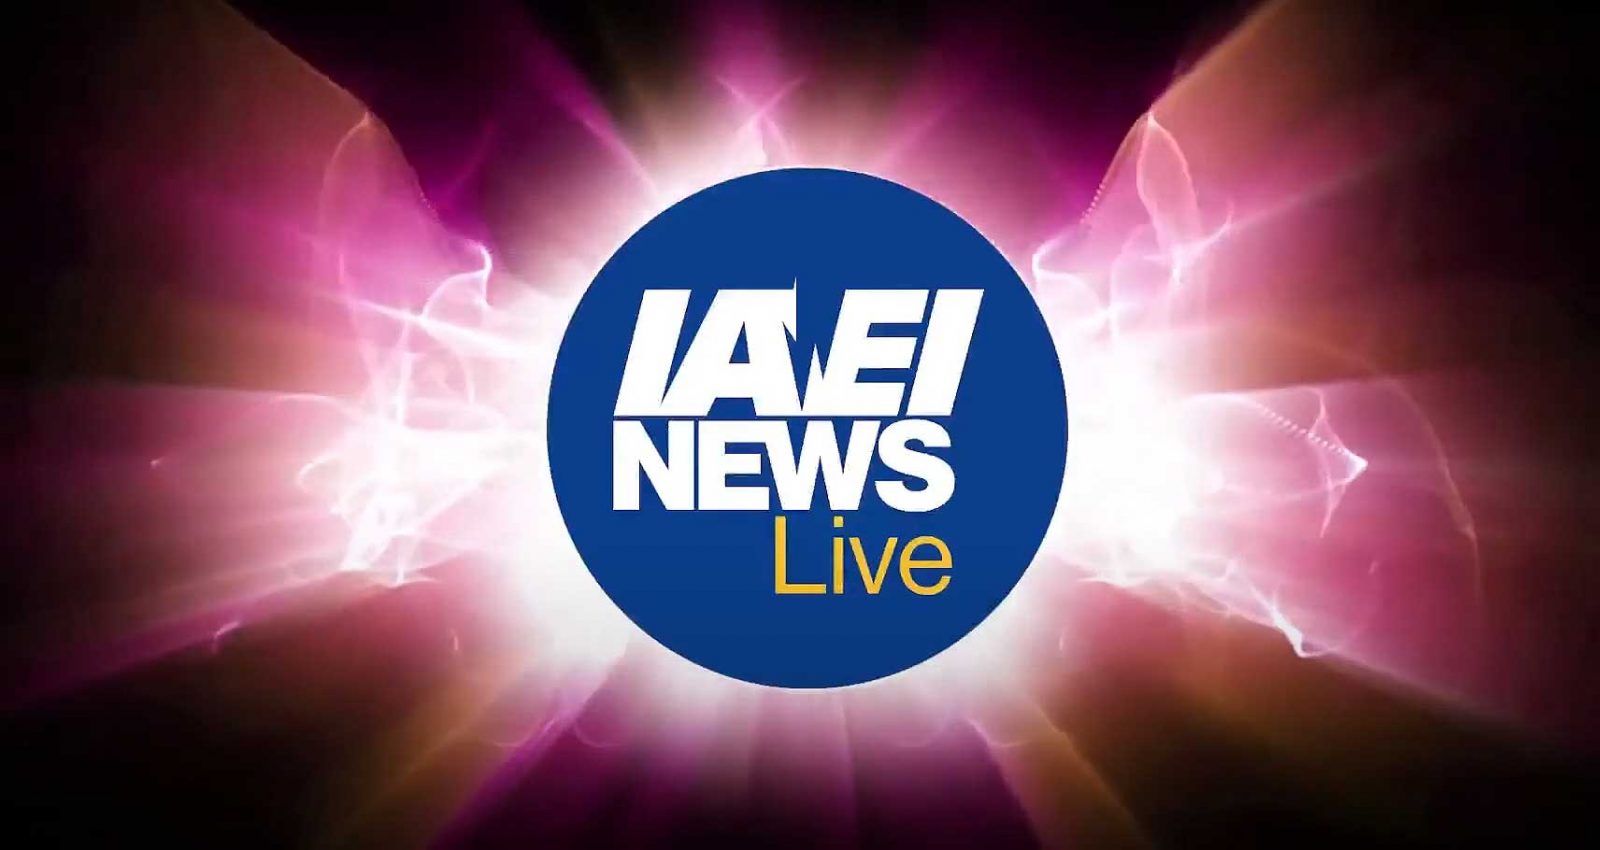 IAEI News Live Industry Reference